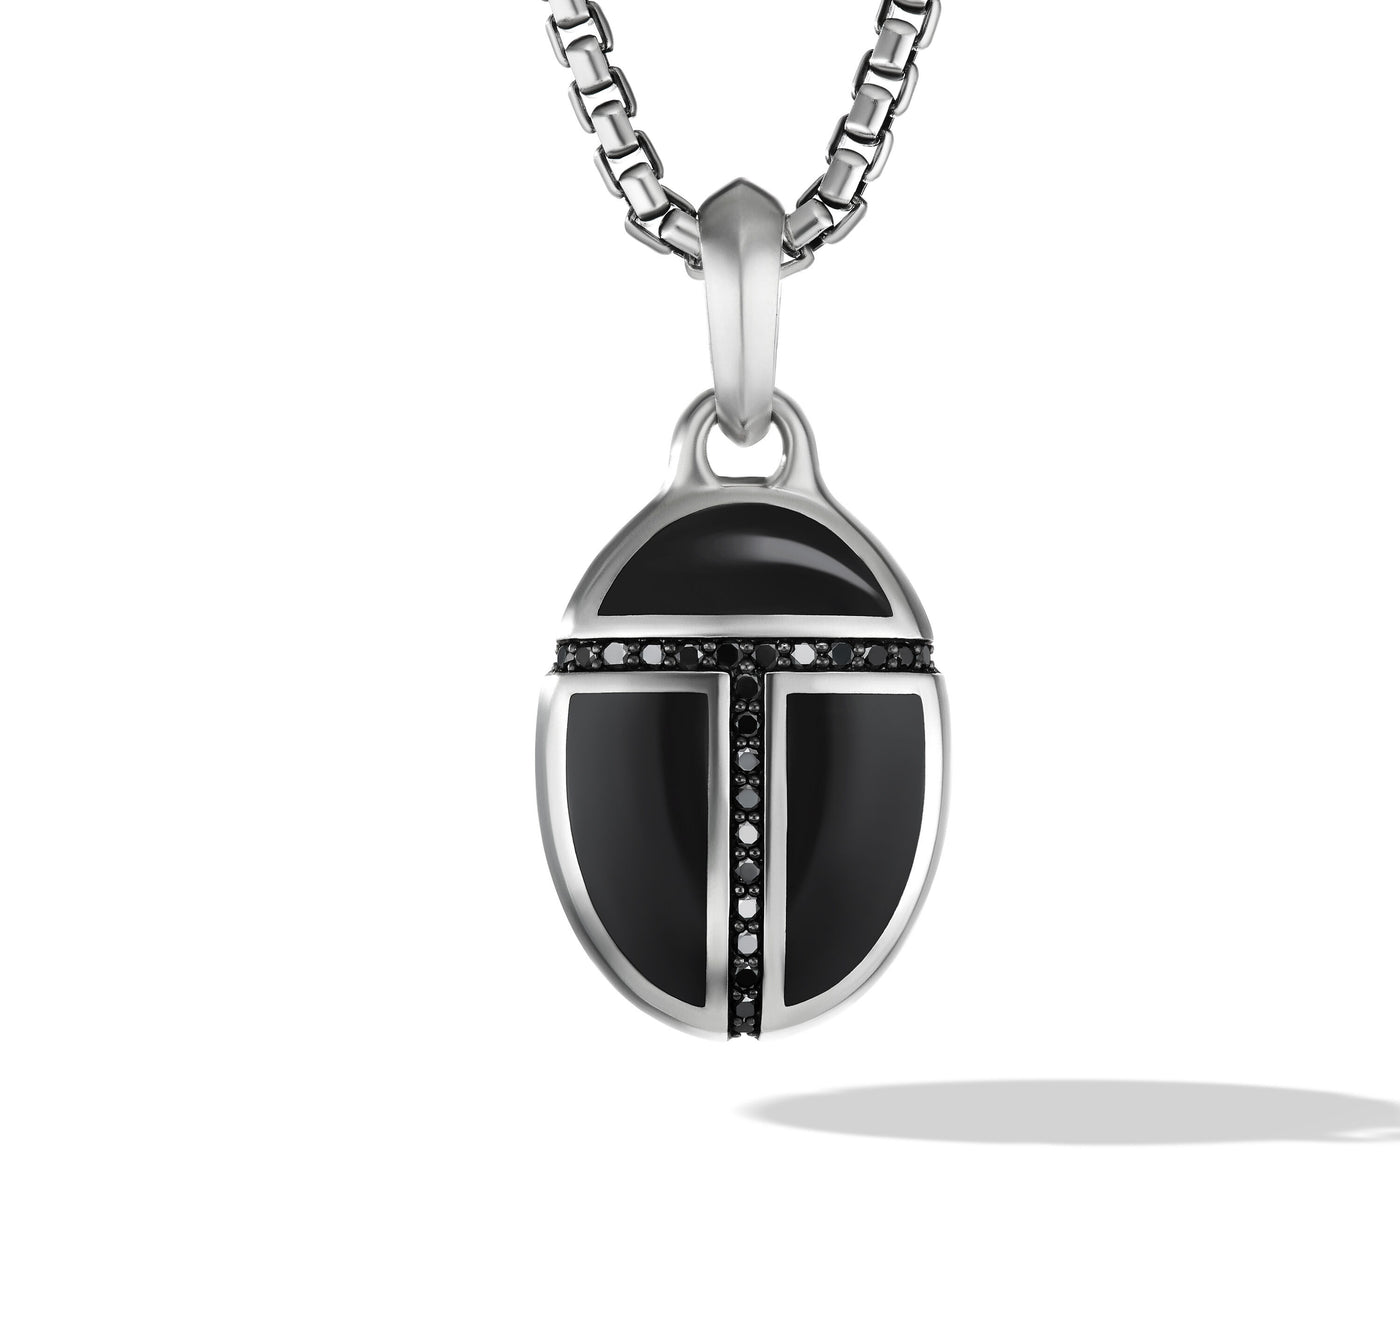 Cairo Amulet in Sterling Silver with Black Onyx and Black Diamonds\, 23mm